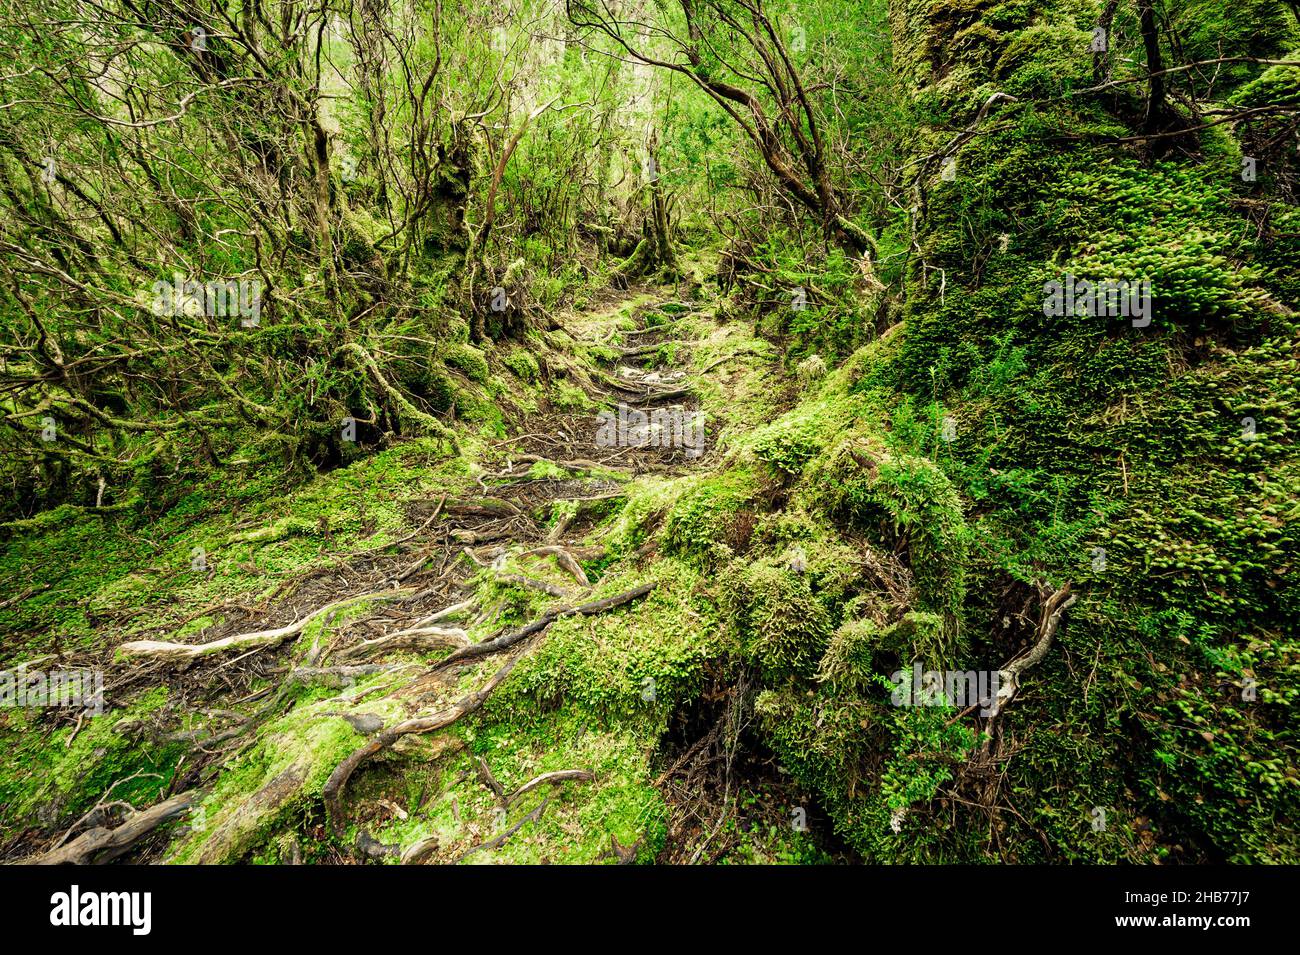 Legendary Enchanted Forest in Cradle Mountain & Lake St Clair National Park. Stock Photo